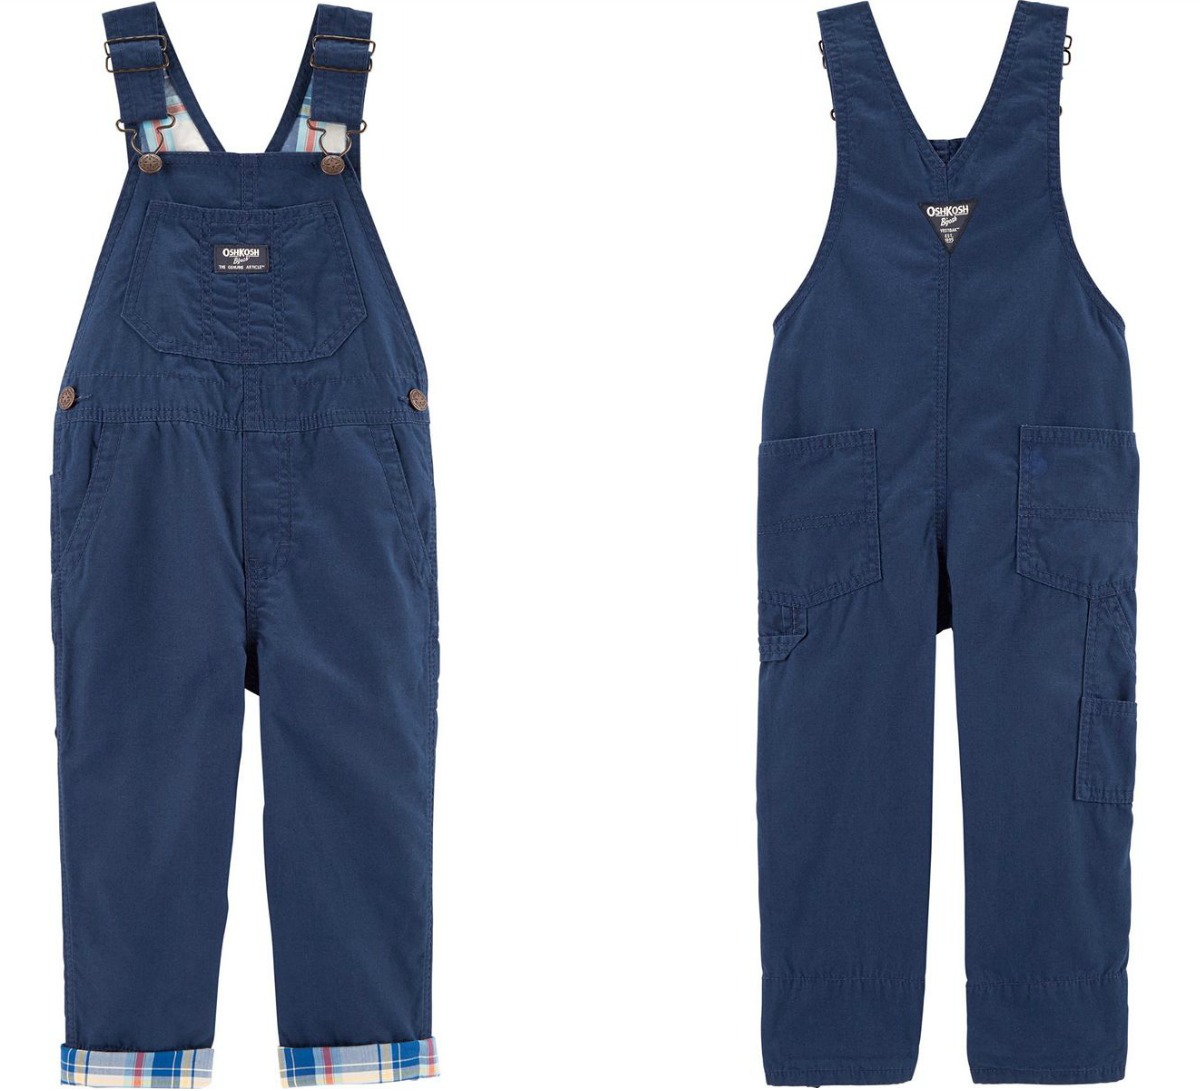 Front and back view of boys denim overalls